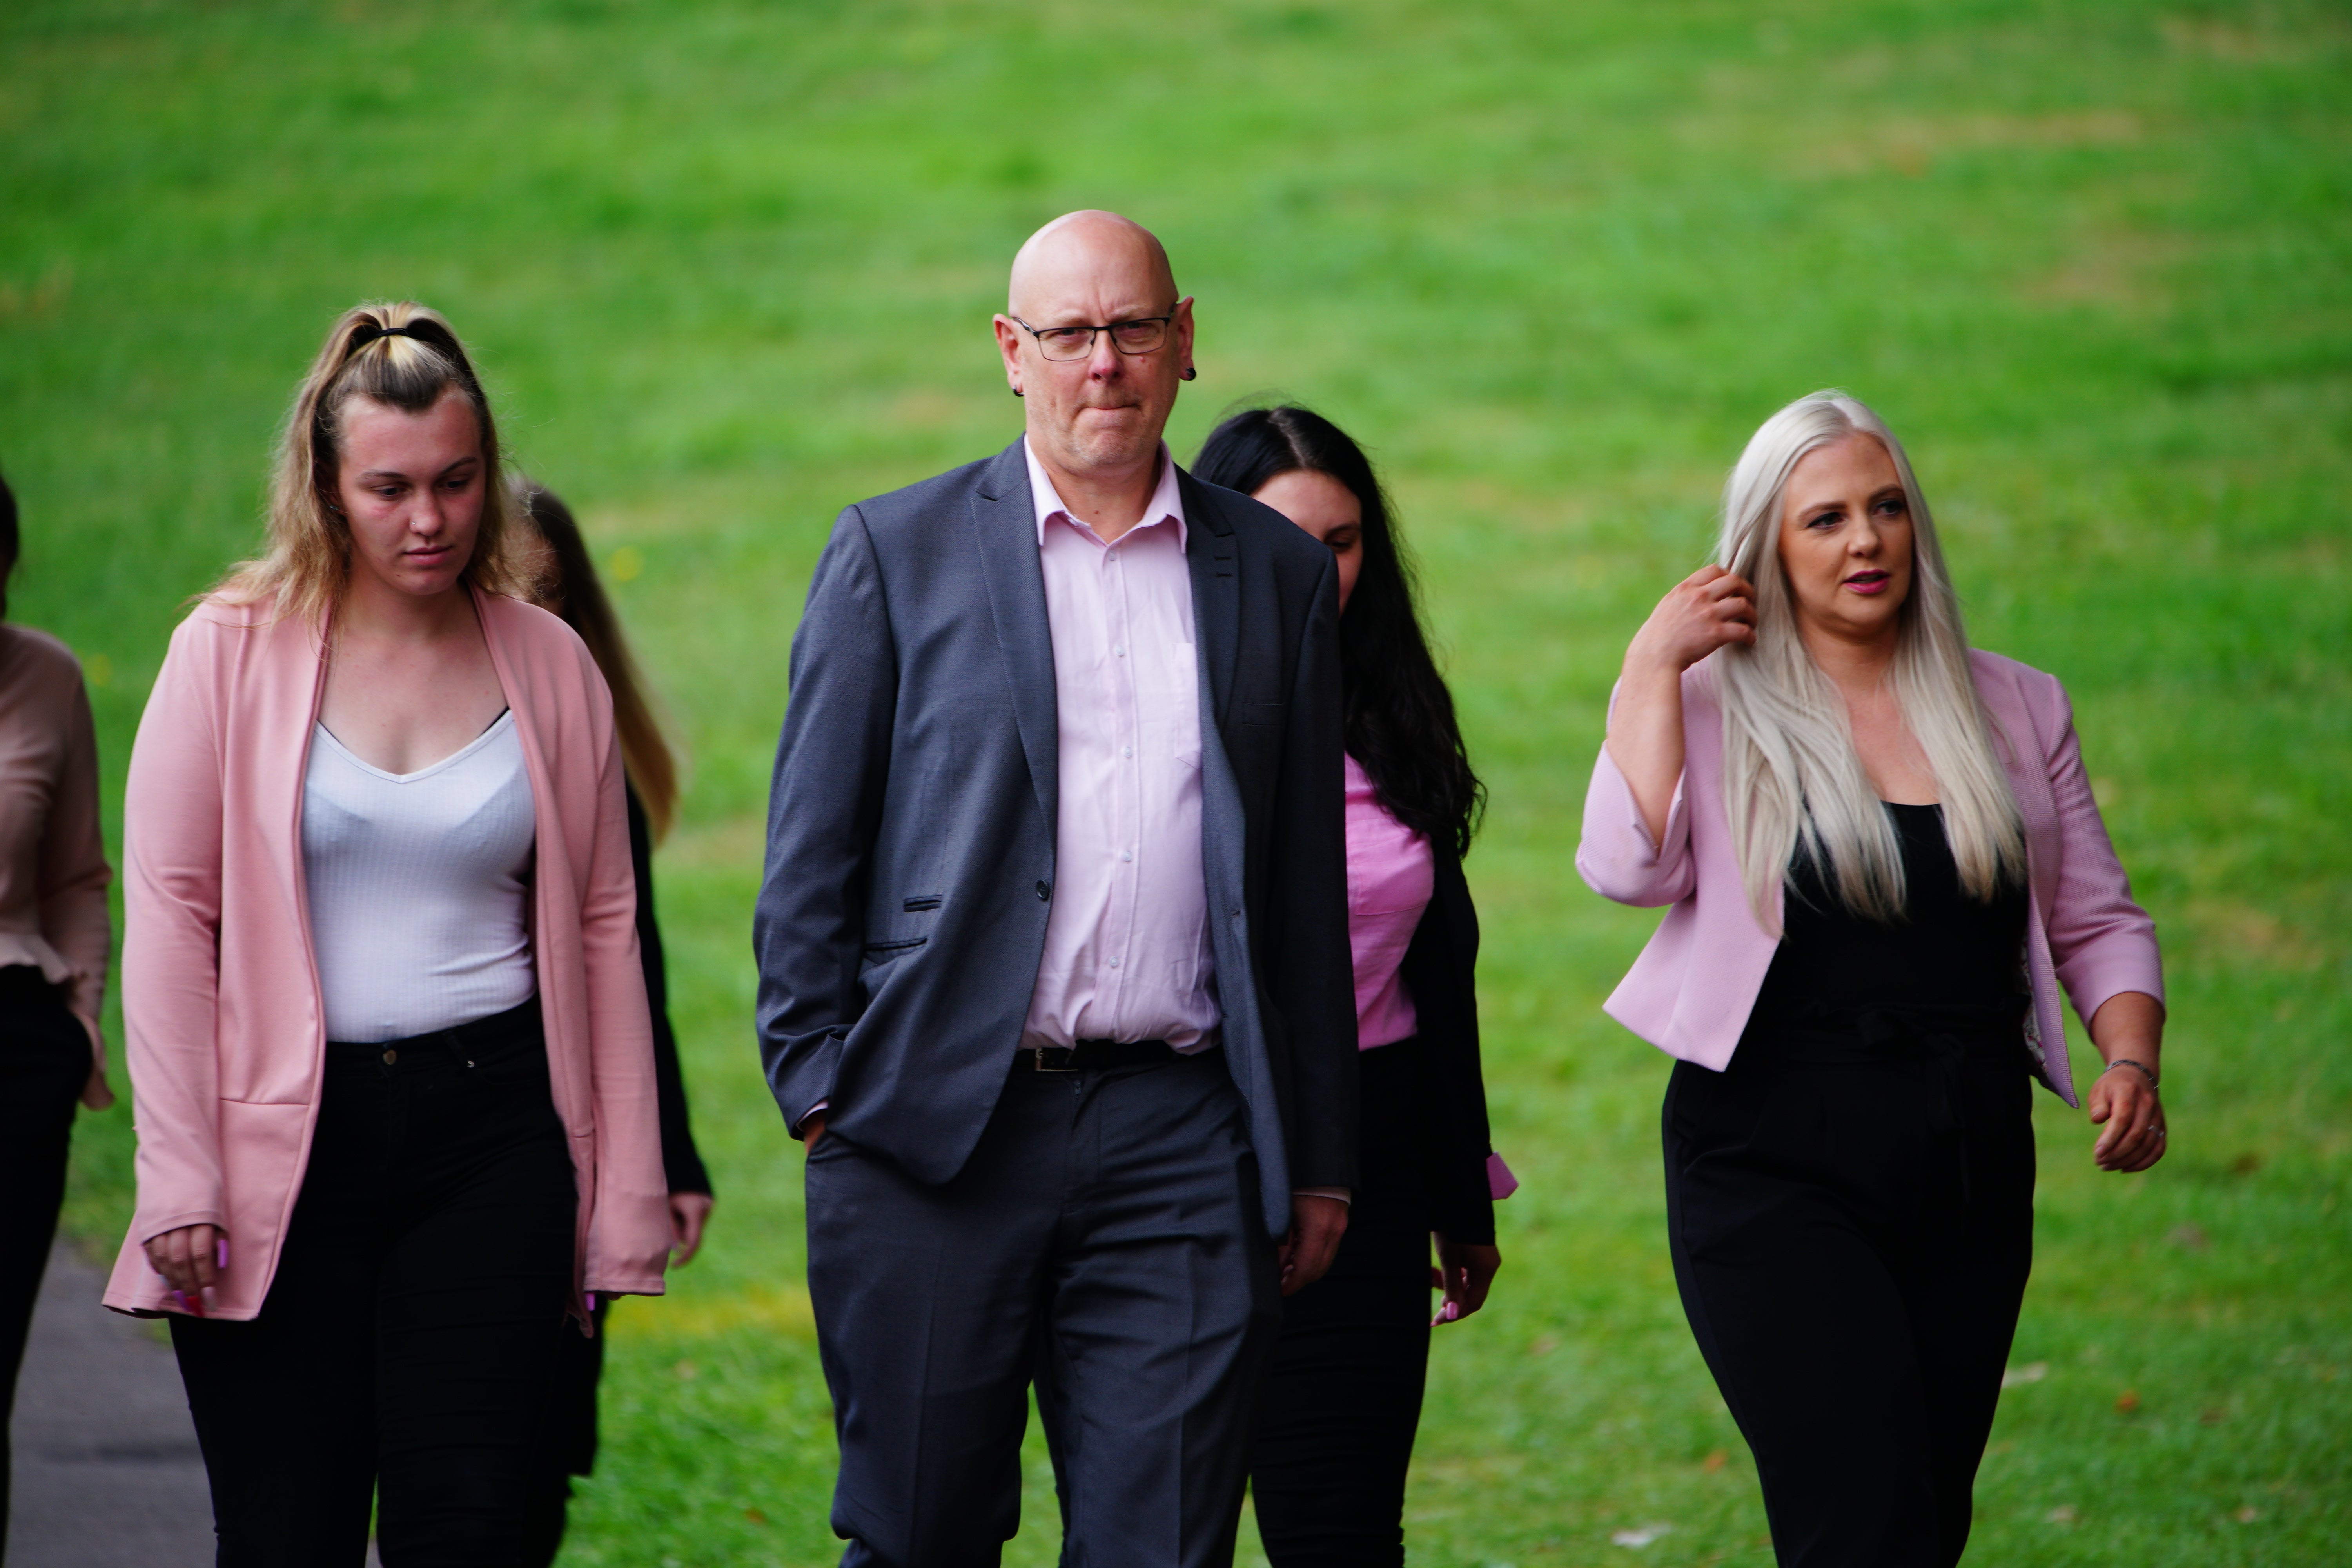 Celia Marsh’s husband Andy Marsh and members of her family arrive for the inquest at Avon and Somerset Coroner’s Court in Bristol (Ben Birchall/PA)